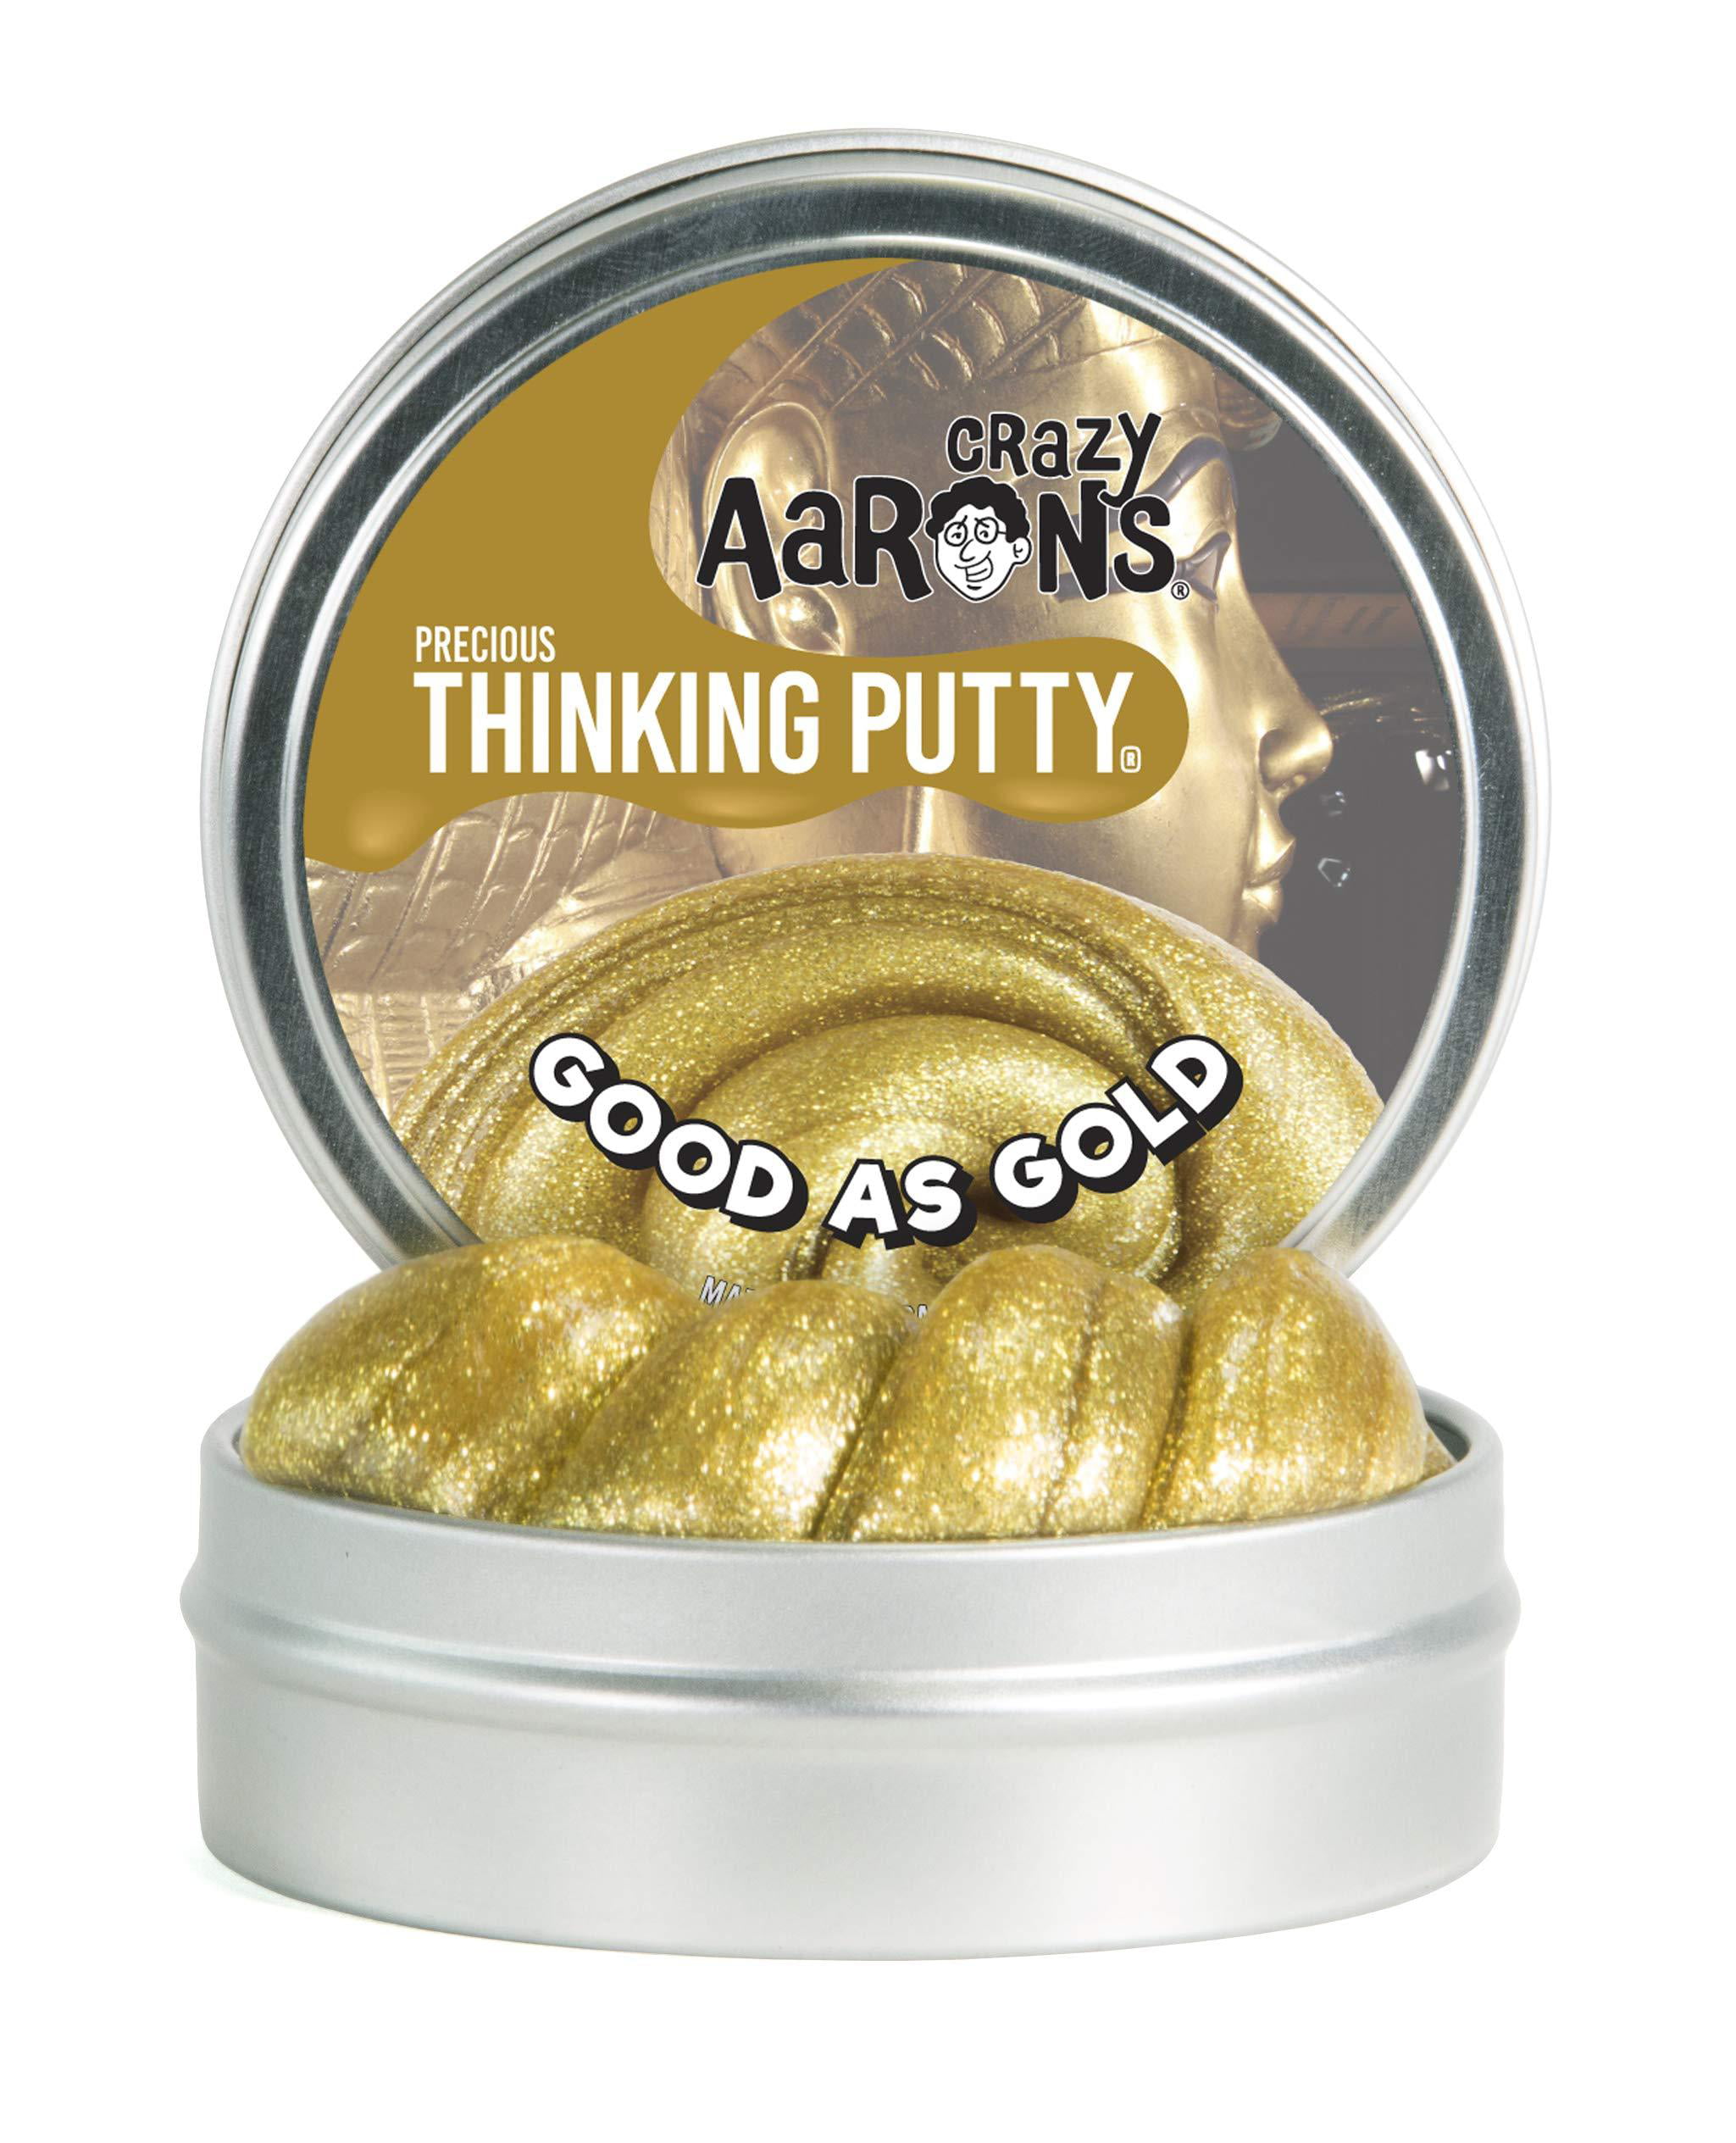 Good as Gold Precious Metals Thinking Putty Novelty Toy by Crazy Aarons GD011 for sale online 